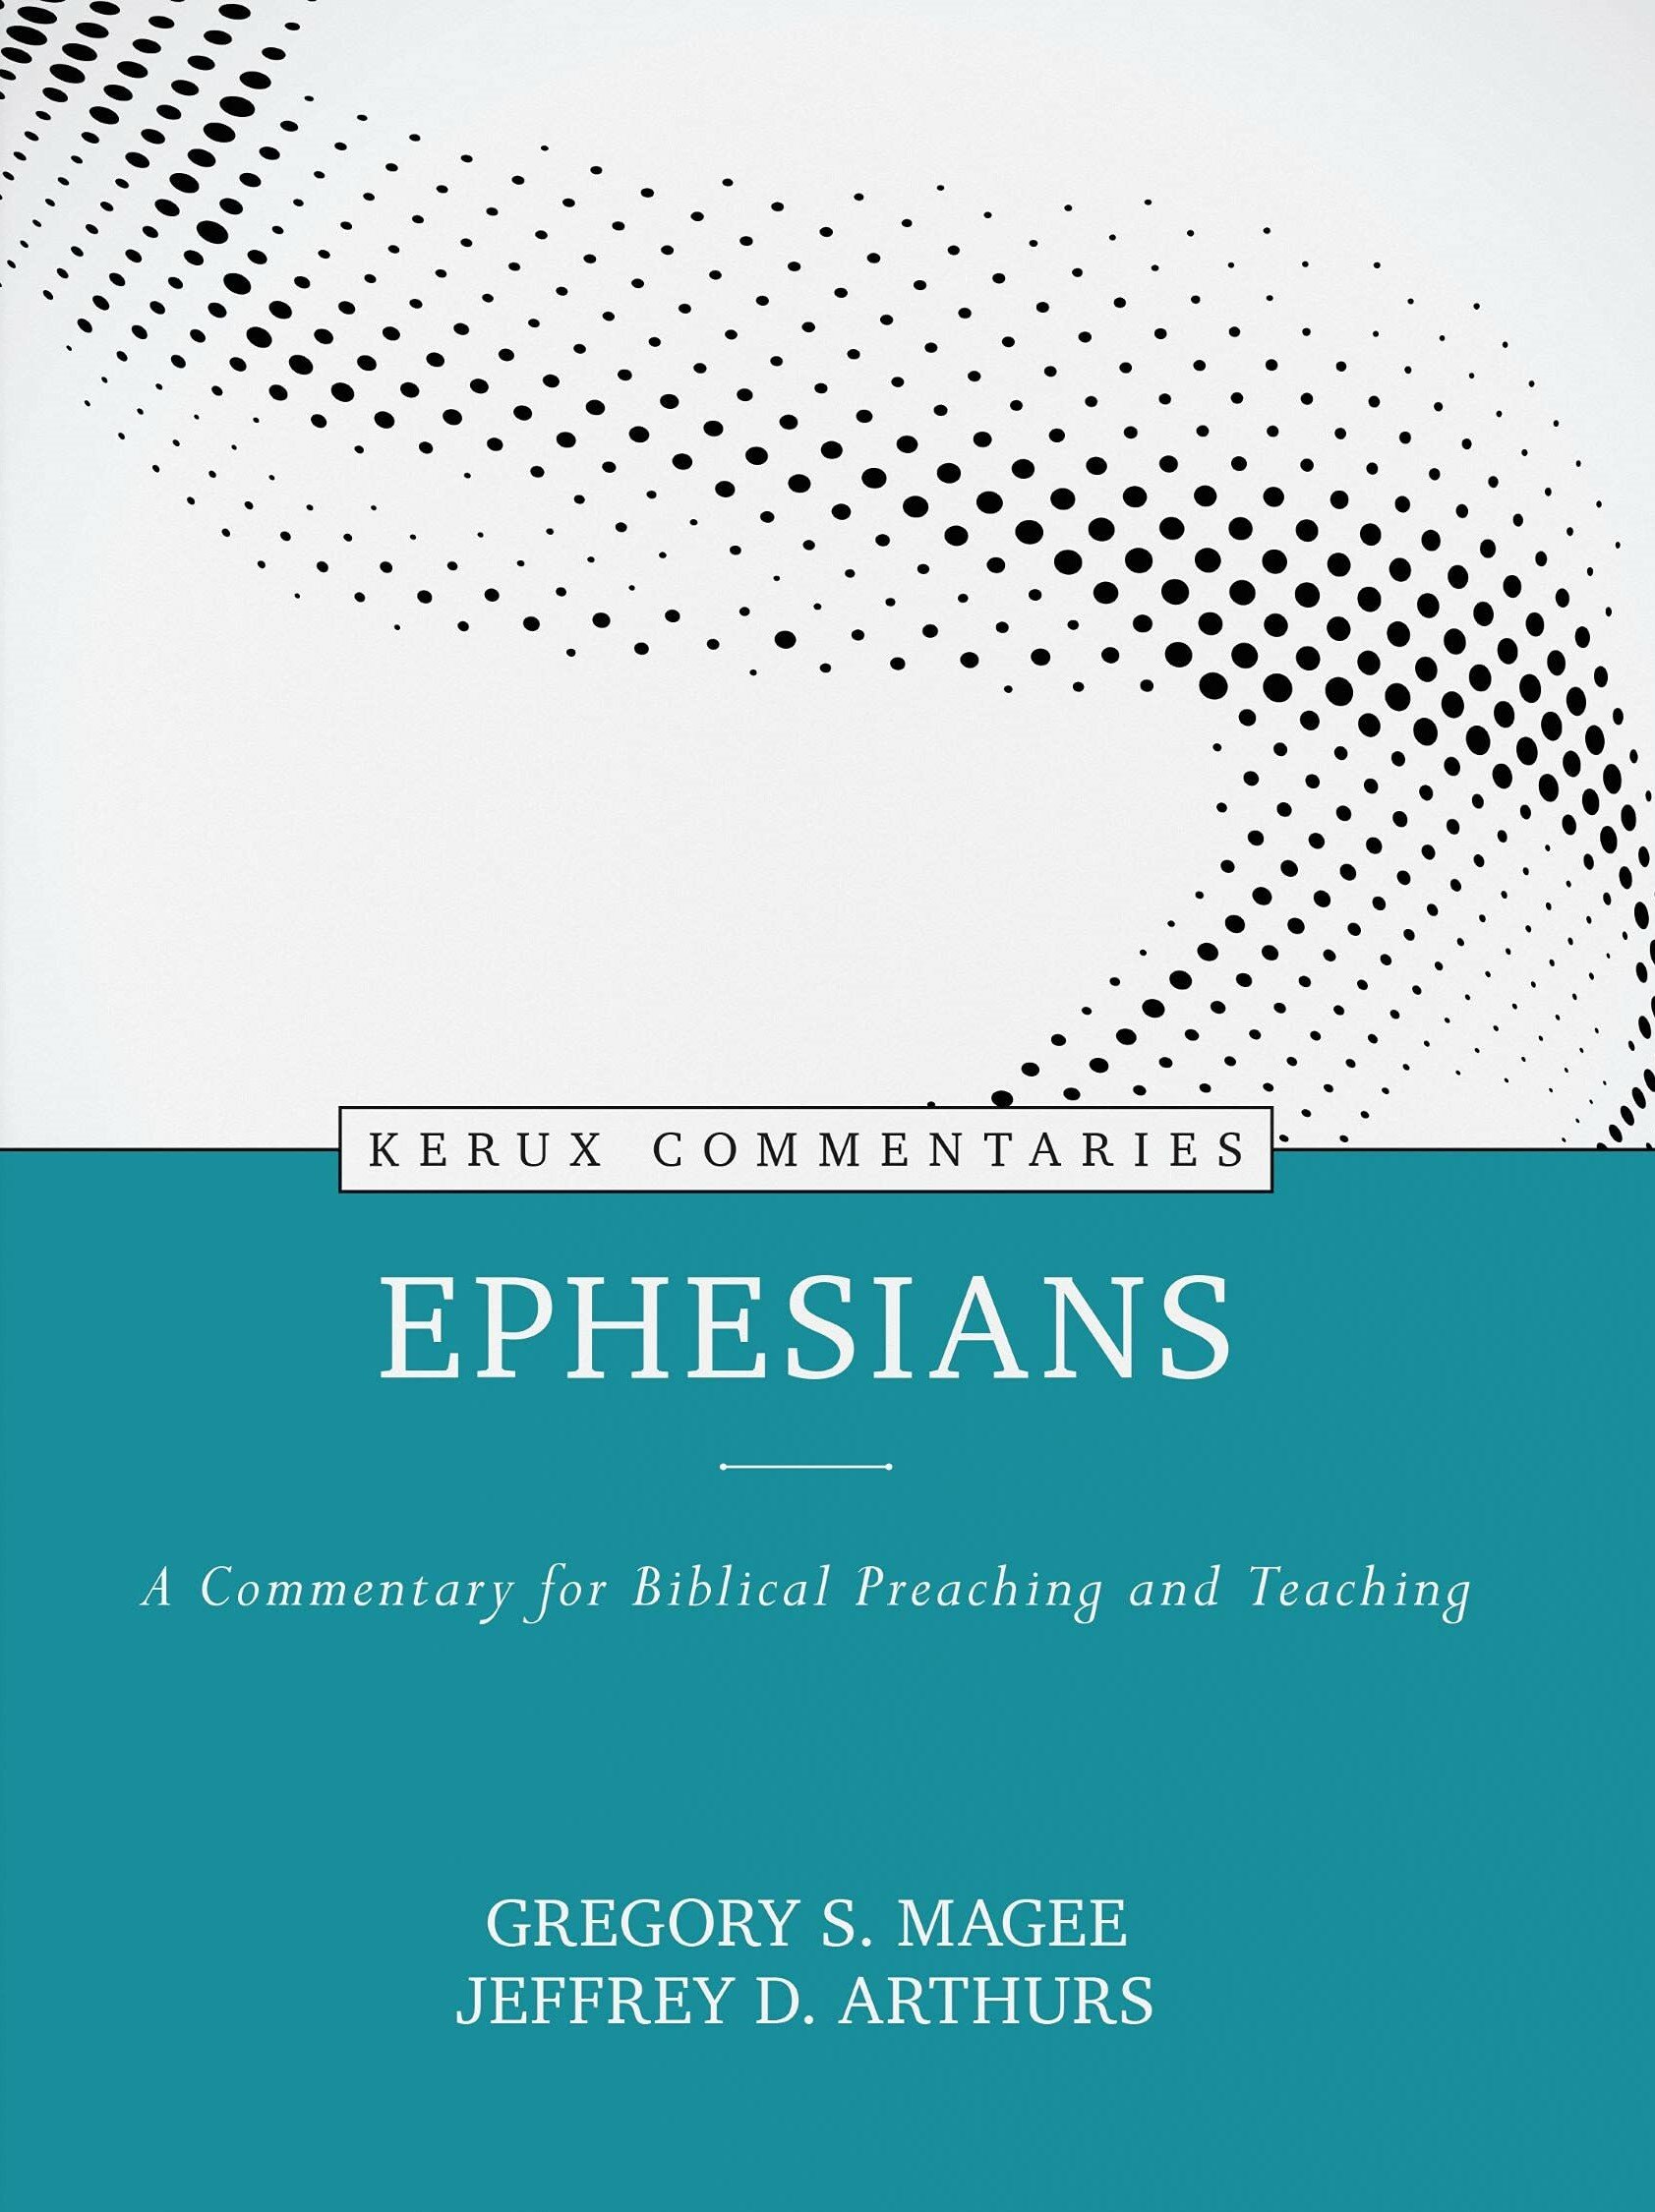 Ephesians: A Commentary for Biblical Preaching and Teaching (Kerux Commentaries | KC)